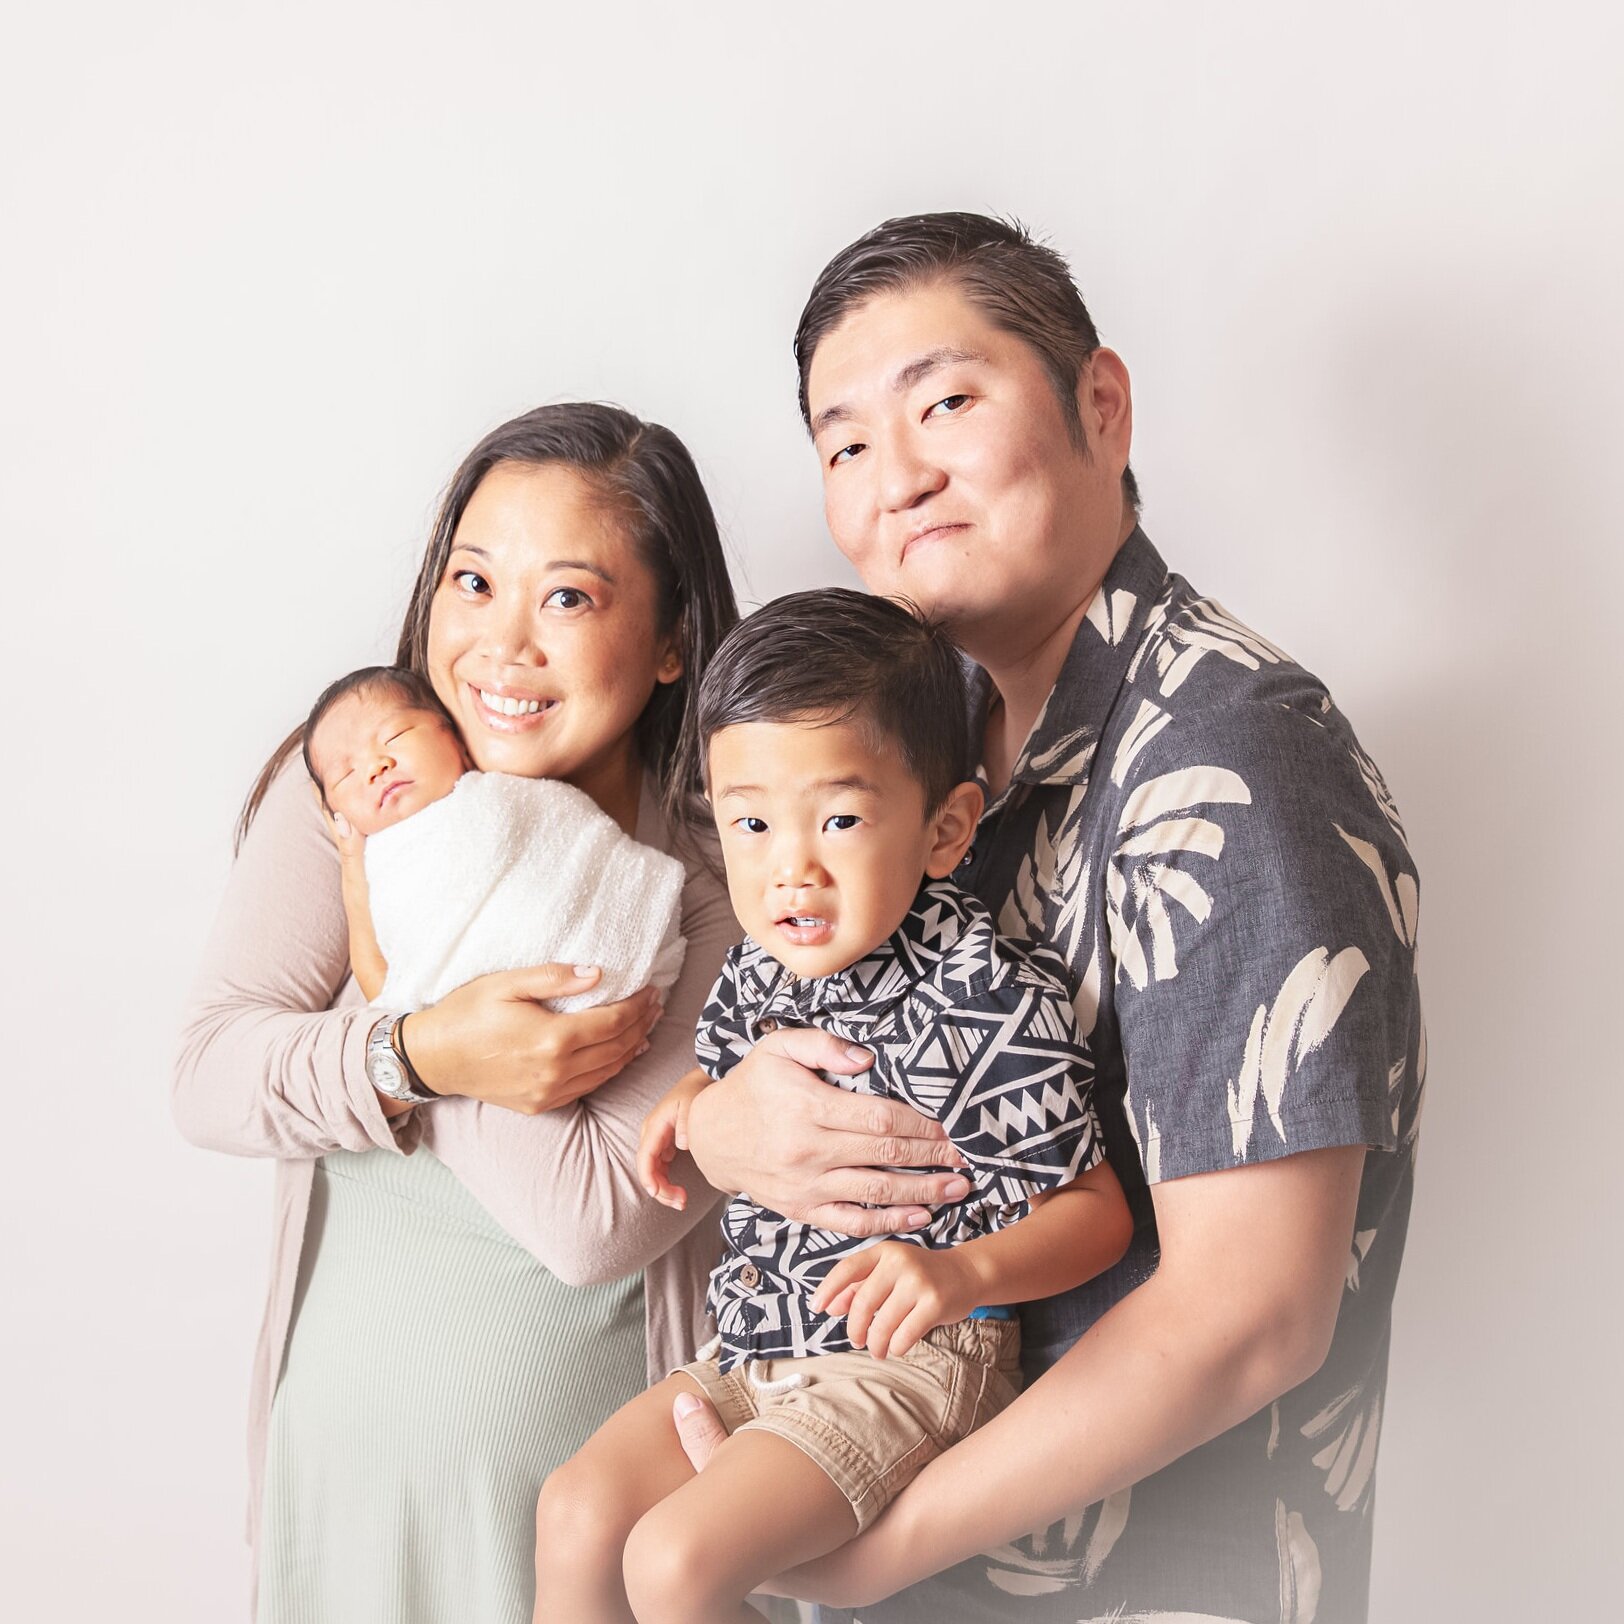  Steve was born on Japan and raised in Santa Cruz, California he has always had a passion for food since his childhood.   He met his wife Lynell who was born and raised on the island of Oahu. She moved to Kauai 14 years ago to pursue working food and